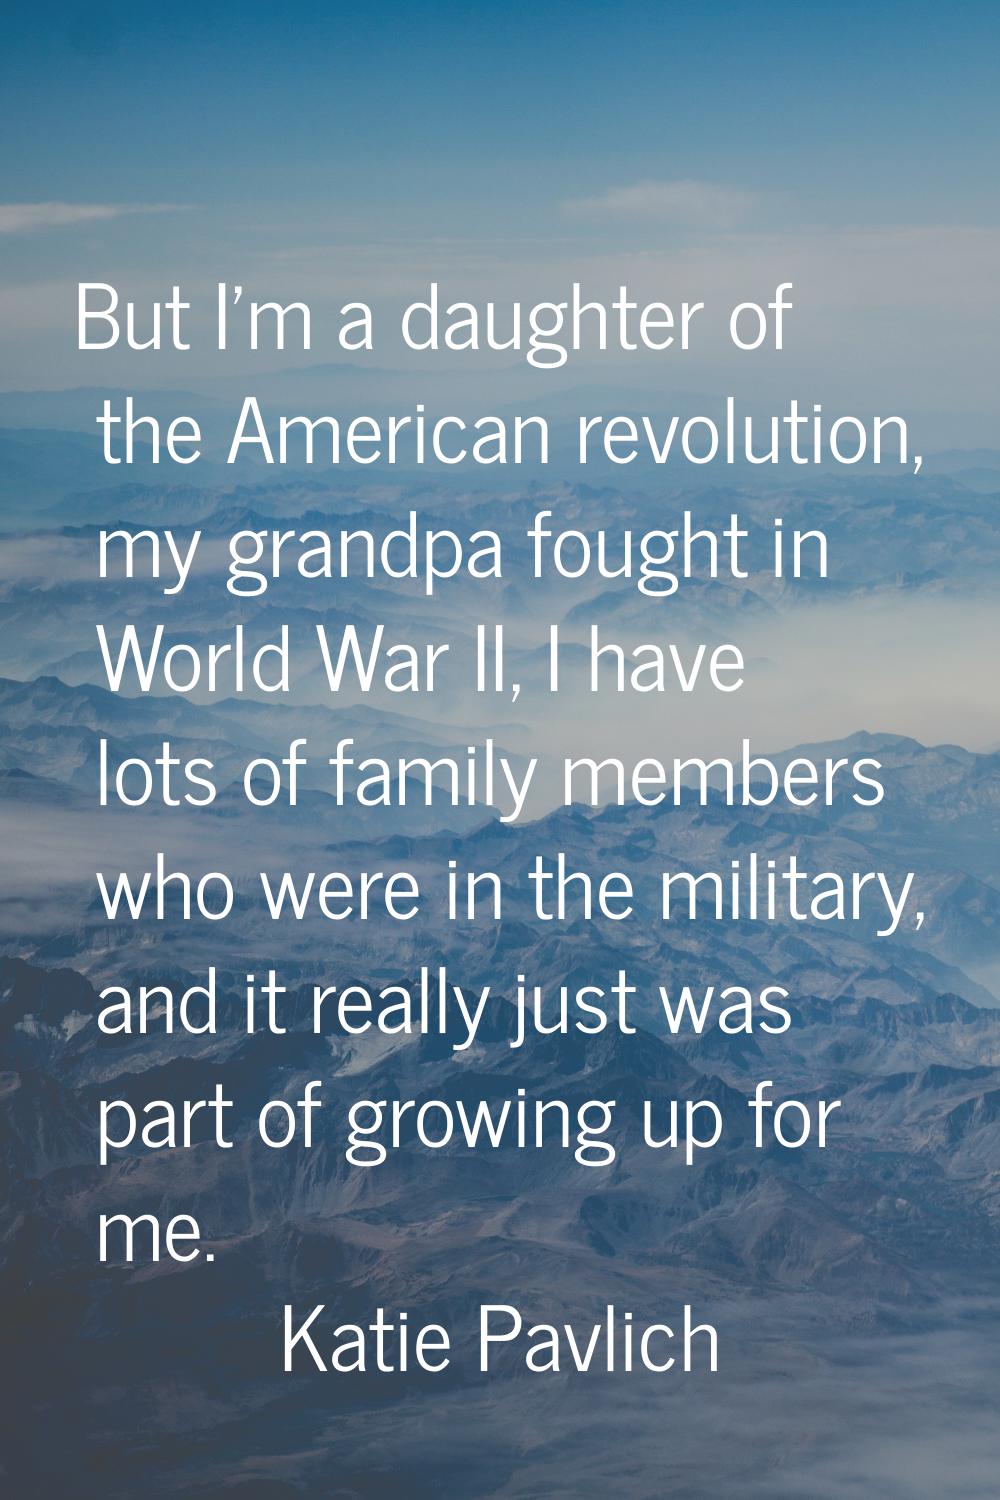 But I'm a daughter of the American revolution, my grandpa fought in World War II, I have lots of fa